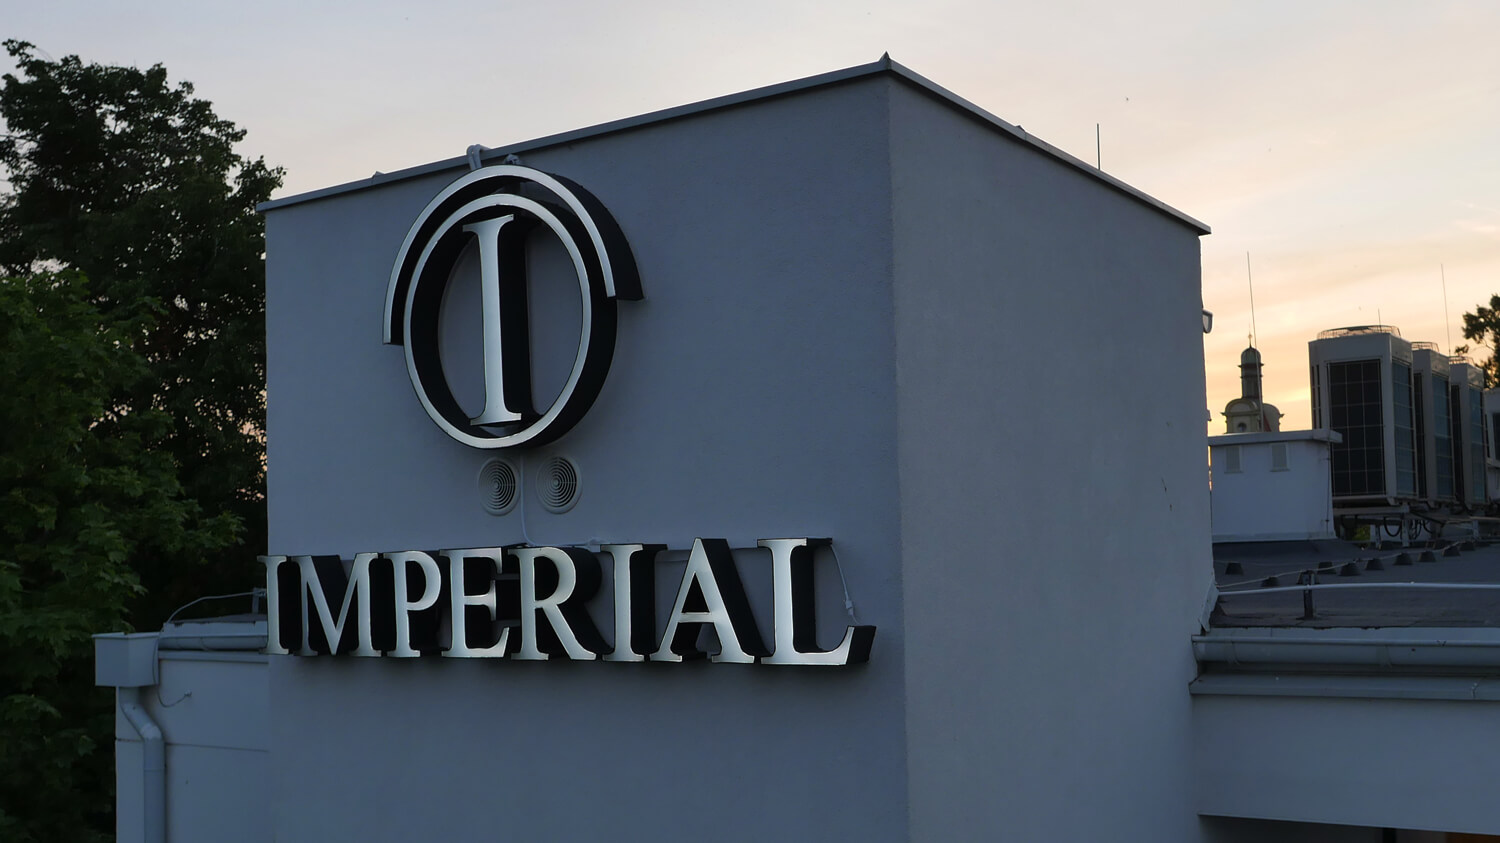 Imperial - Hotel Imperial - spatial illuminated letters placed on the wall